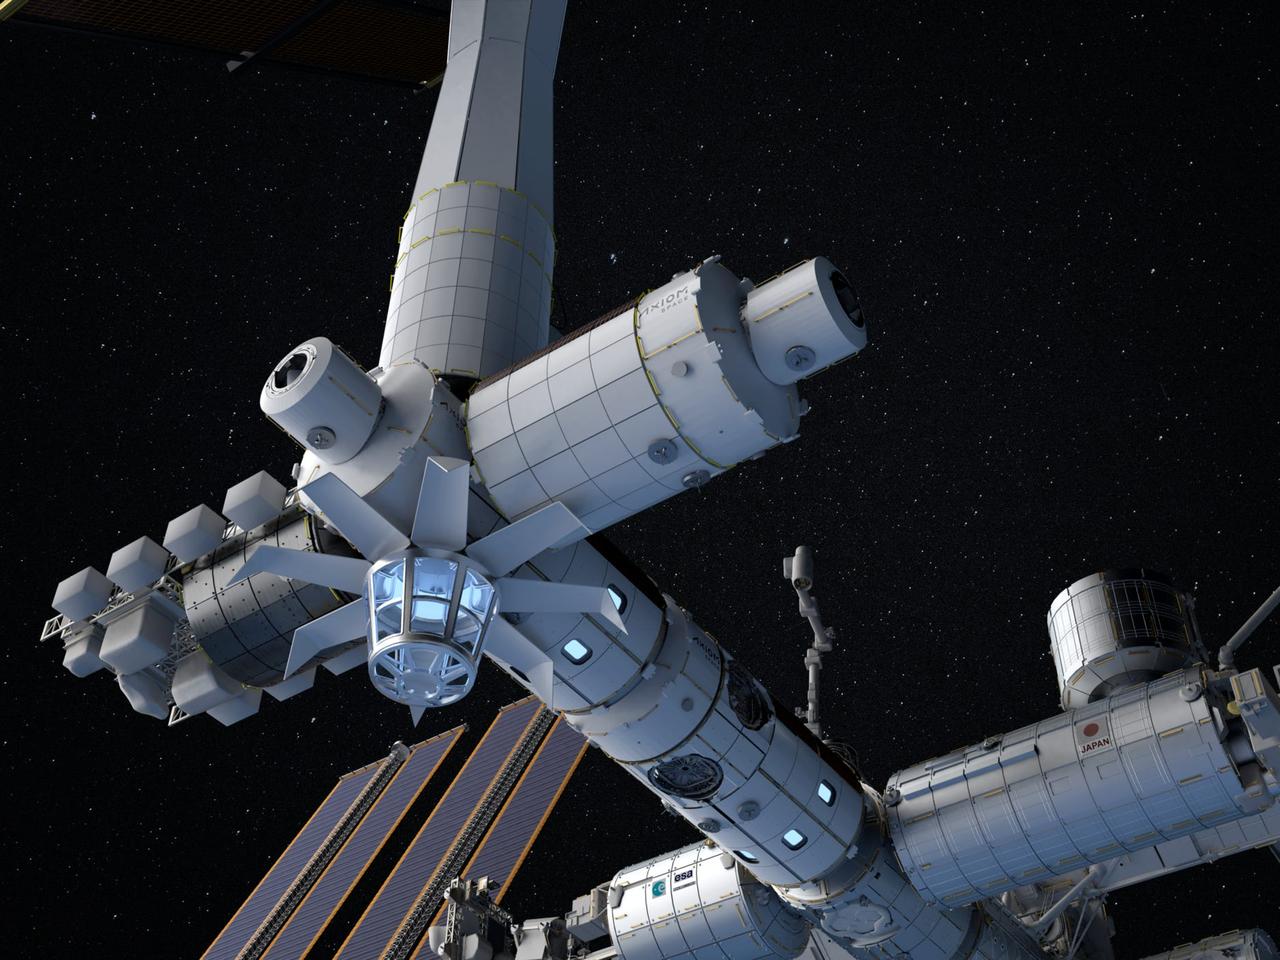 The exterior of an Axiom module, which the studio will be modeled after.